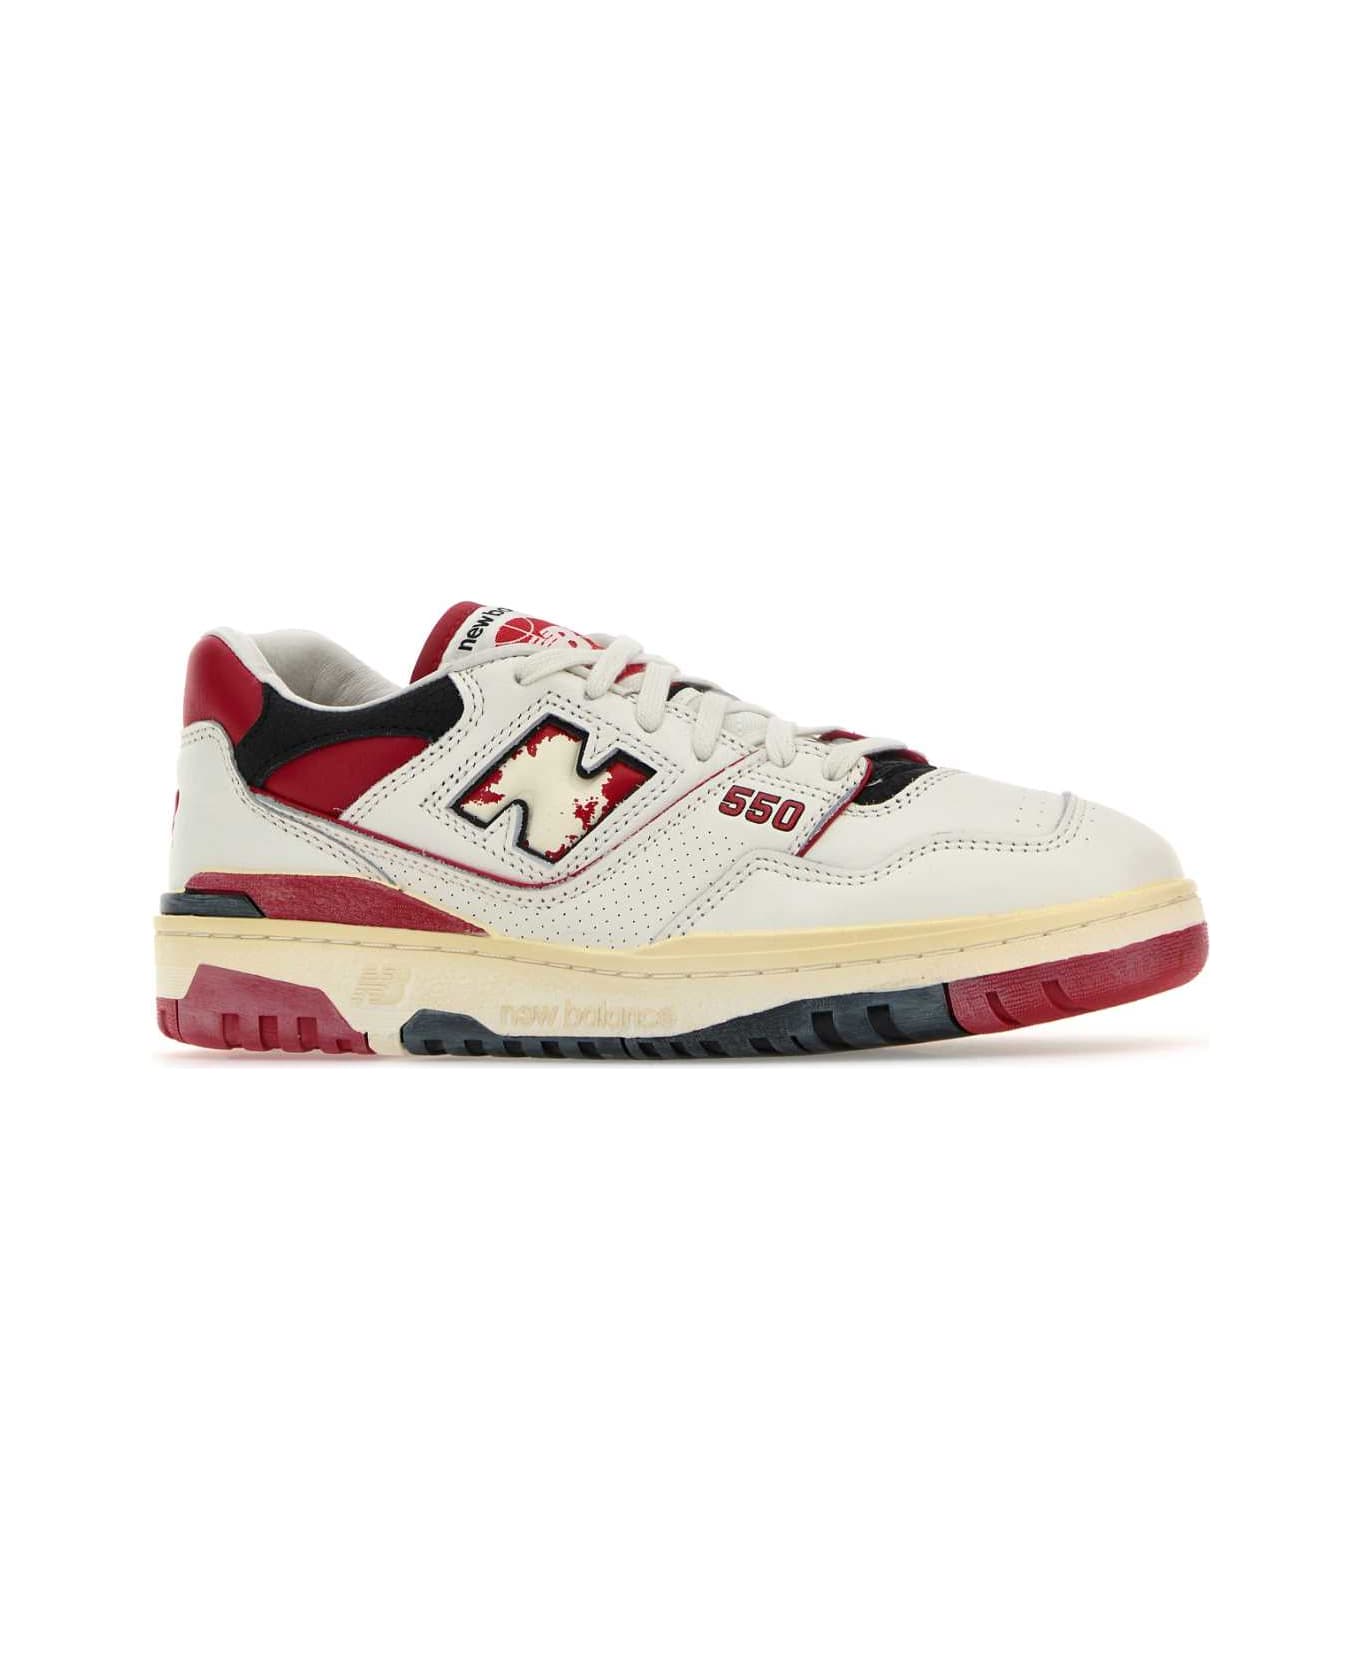 New Balance Multicolor Leather 550 Sneakers - OFFWHITERED スニーカー